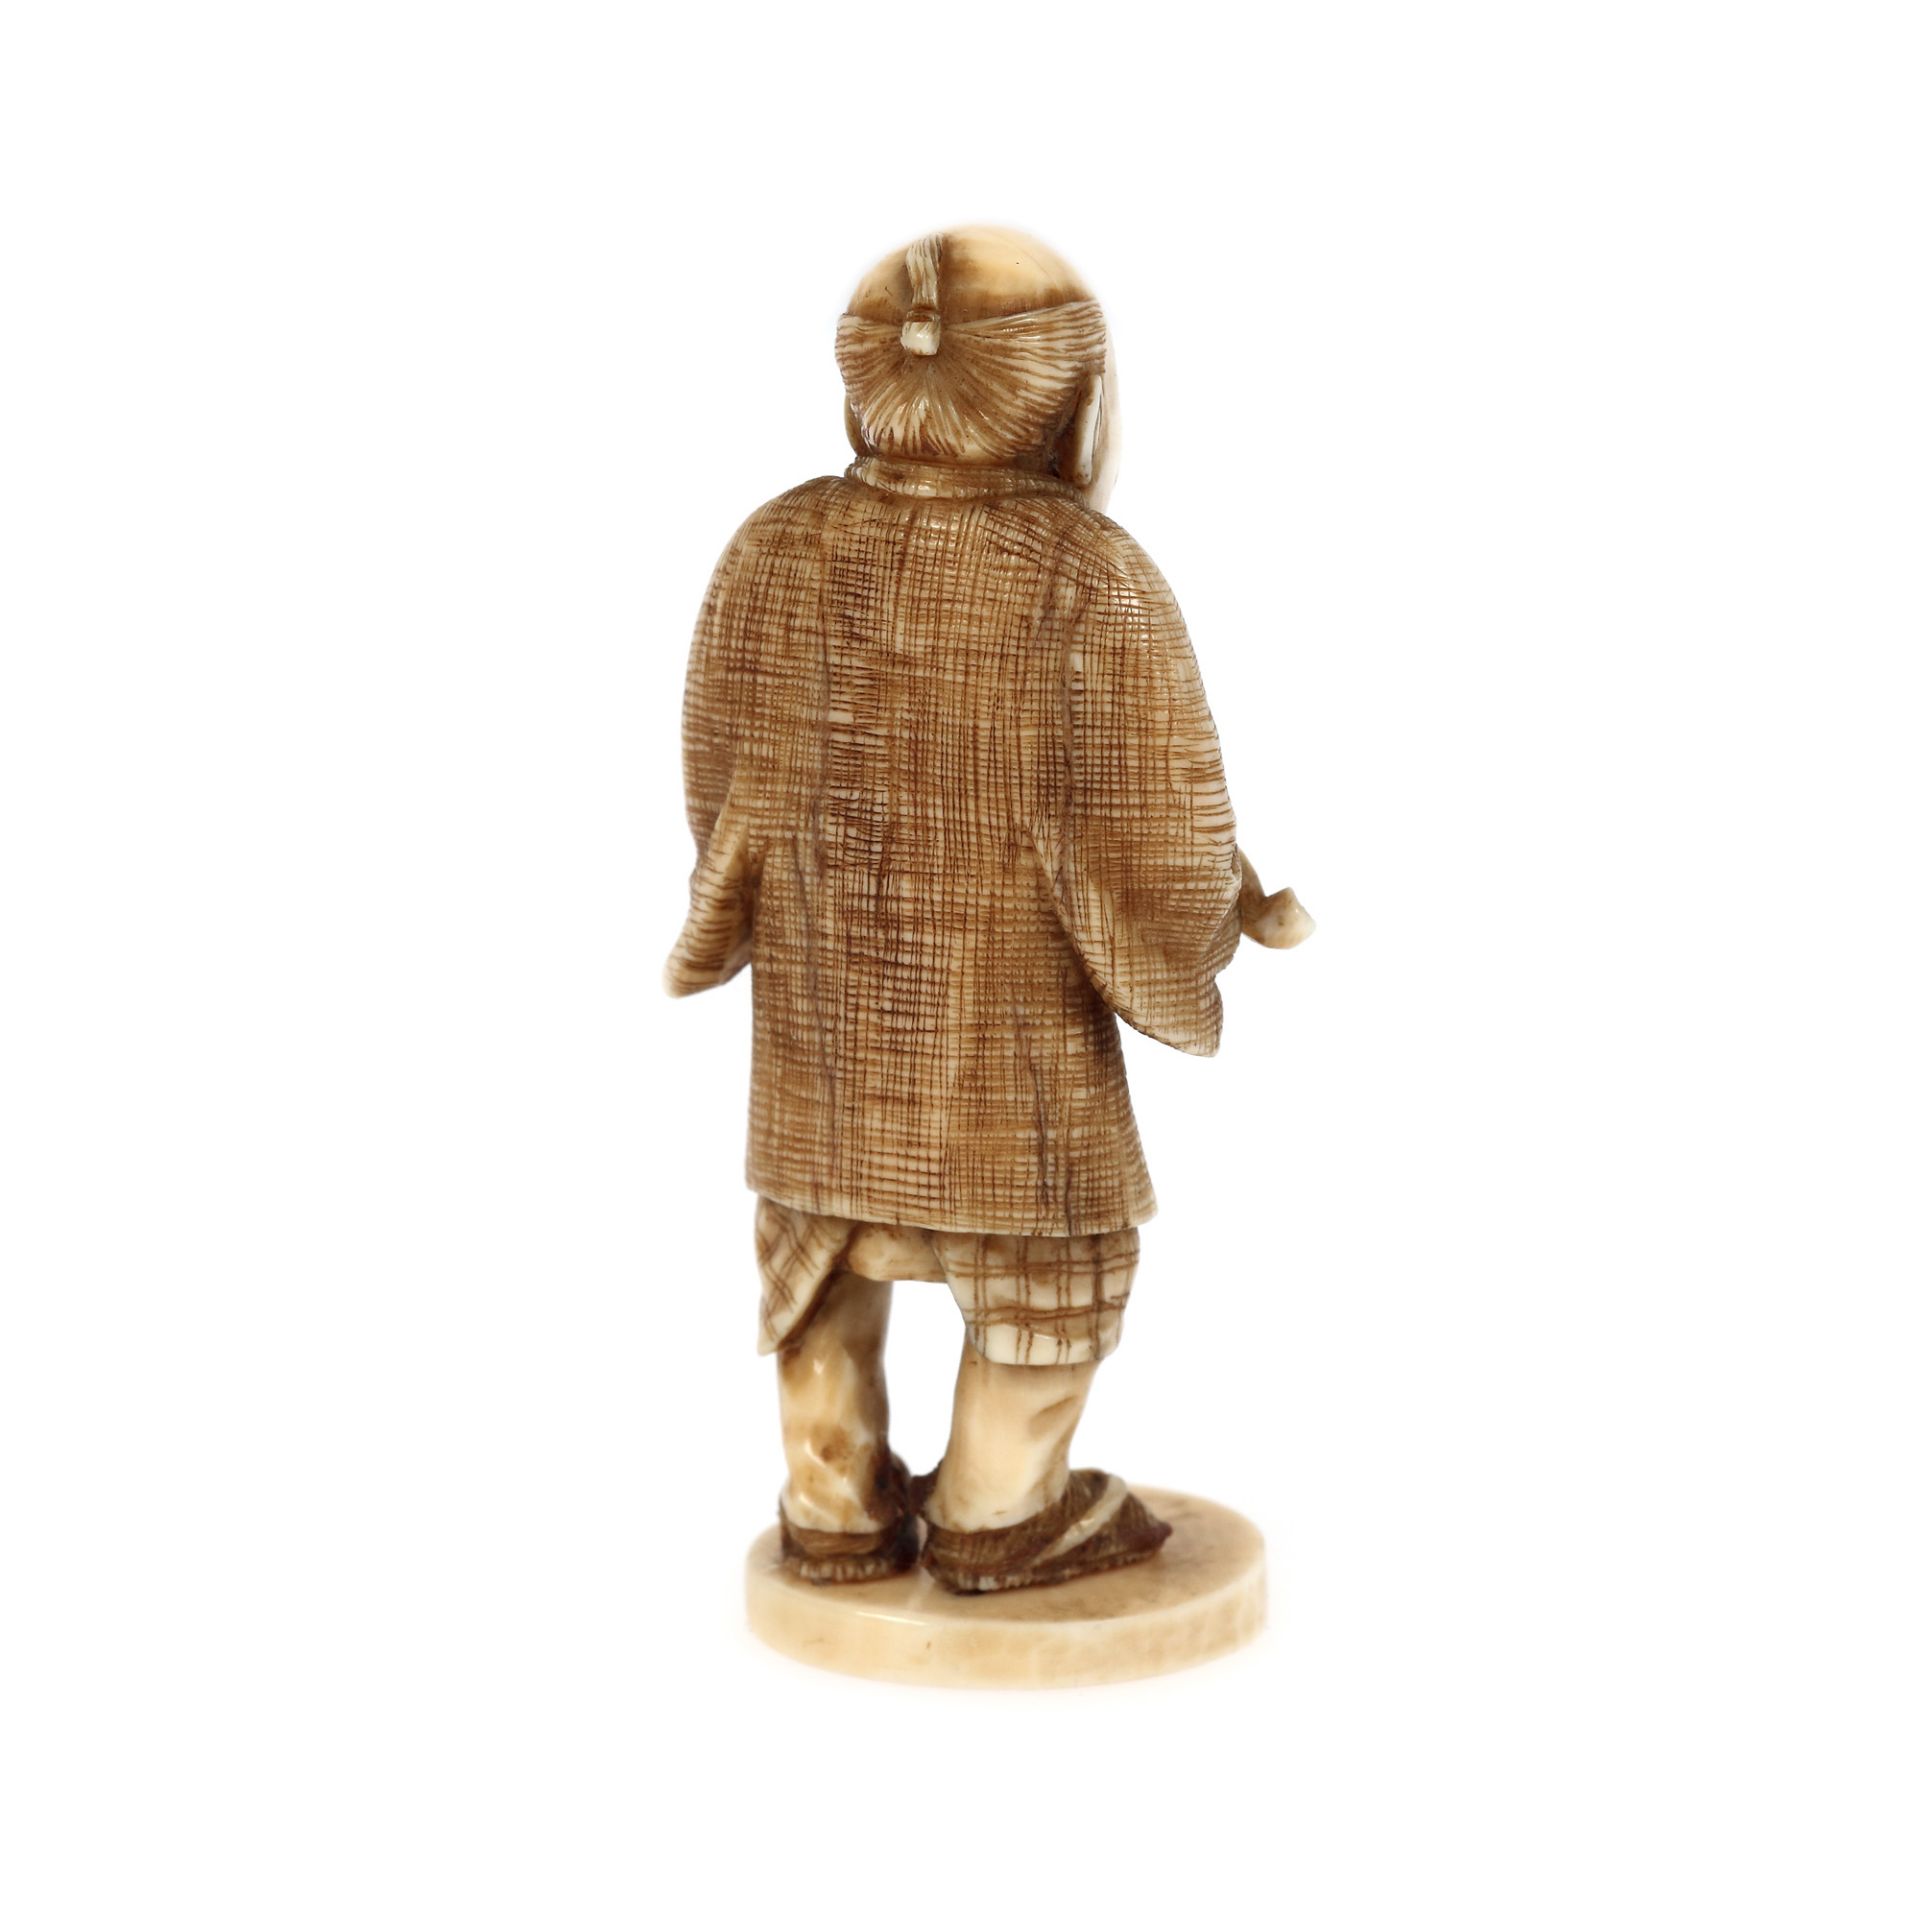 Ivory Netsuke, depicting an old man preparing his pipe, signed, Japan, late 19th century - Image 3 of 4